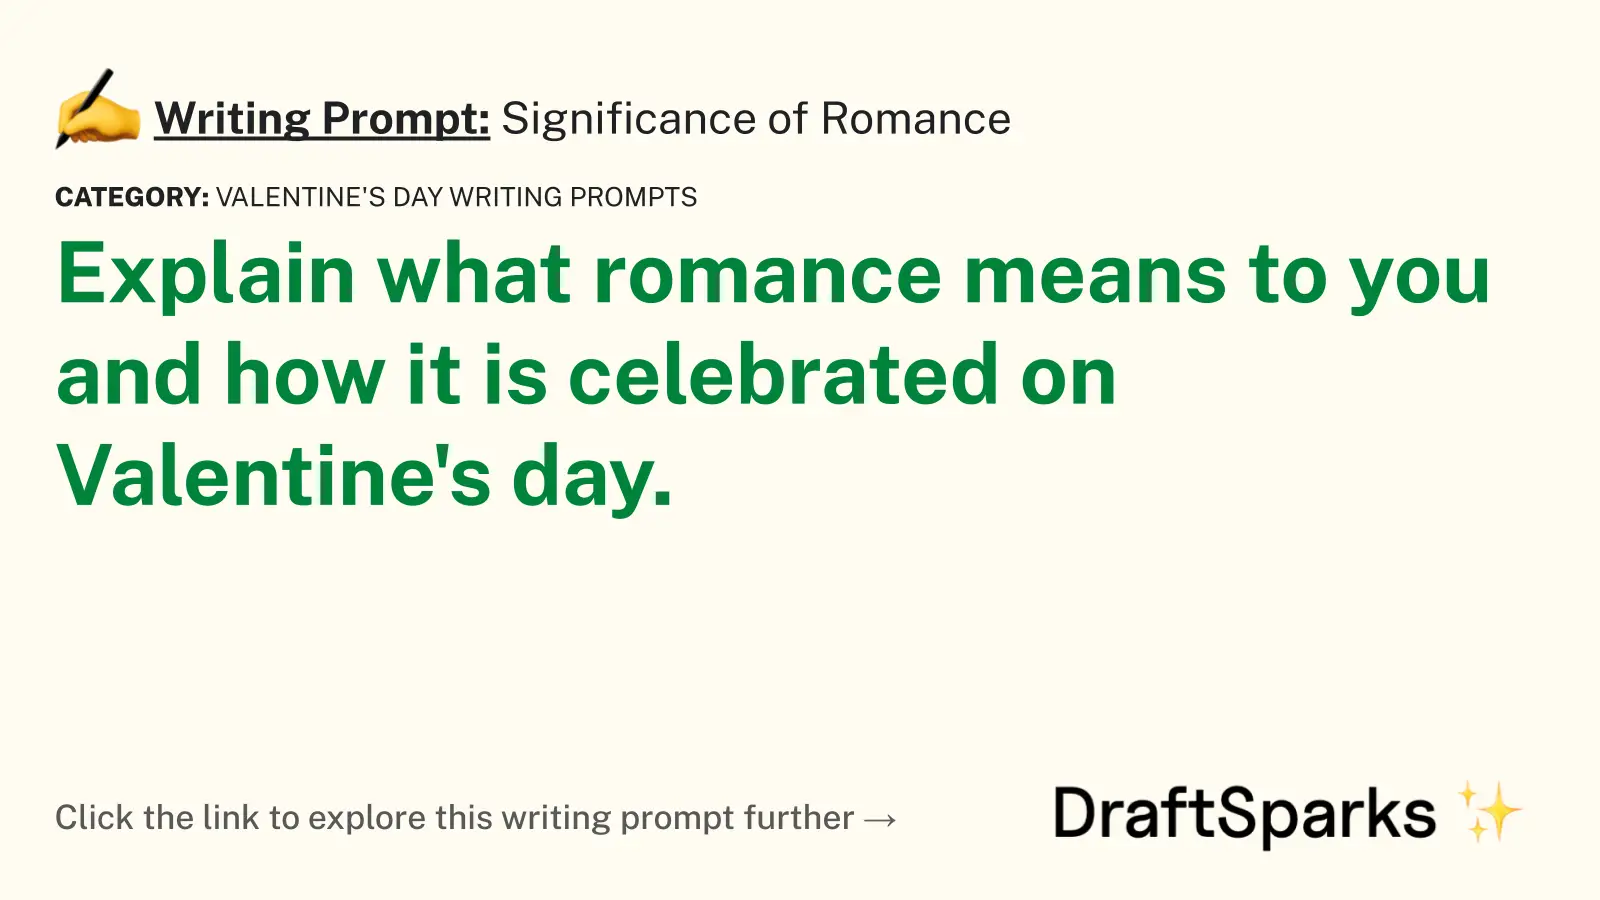 Significance of Romance